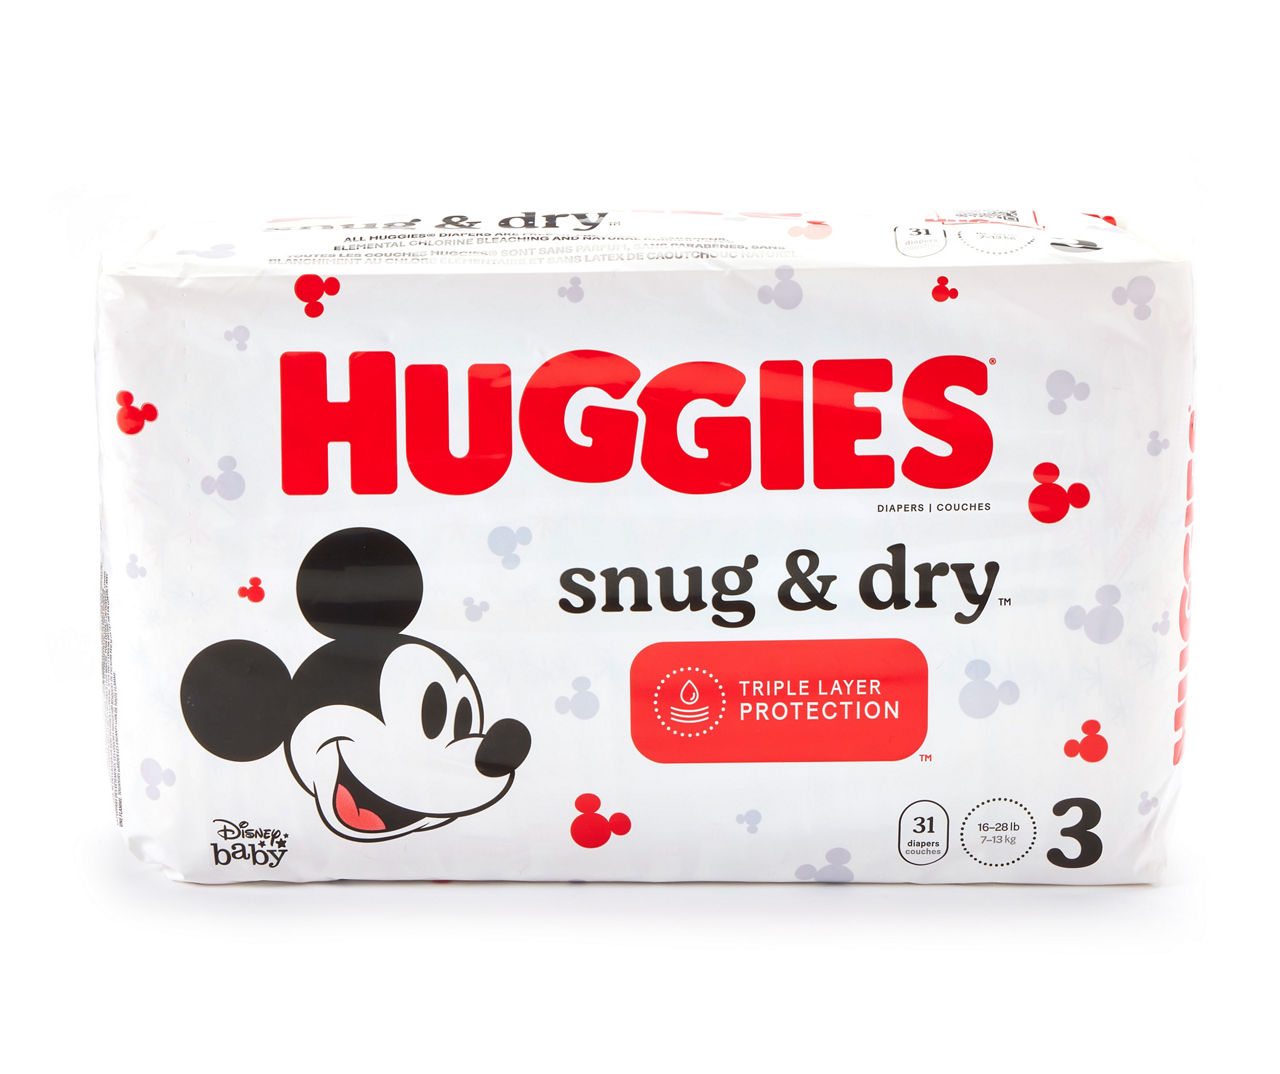 Huggies Snug & Dry Diapers and Huggies Wipes (Review) - Little Us